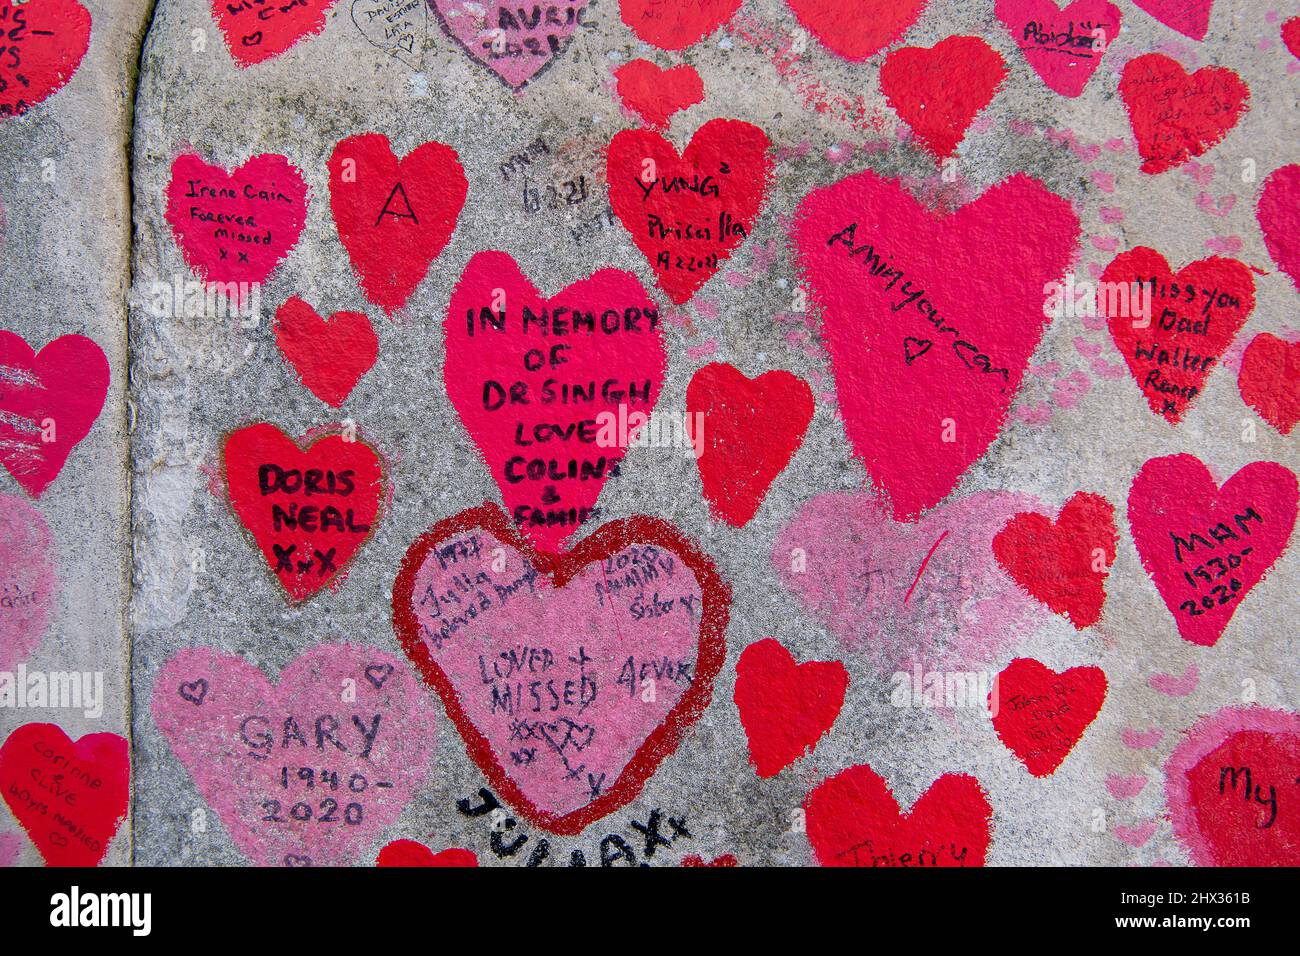 London, UK. 8th March, 2022. The National Covid Memorial Wall next to the River Thames in London by St Thomas' Hospital. The red hearts are repainted on a regular basis so as to not forget all those who have died of Covid-19 since the Pandemic started . Credit: Maureen McLean/Alamy Stock Photo